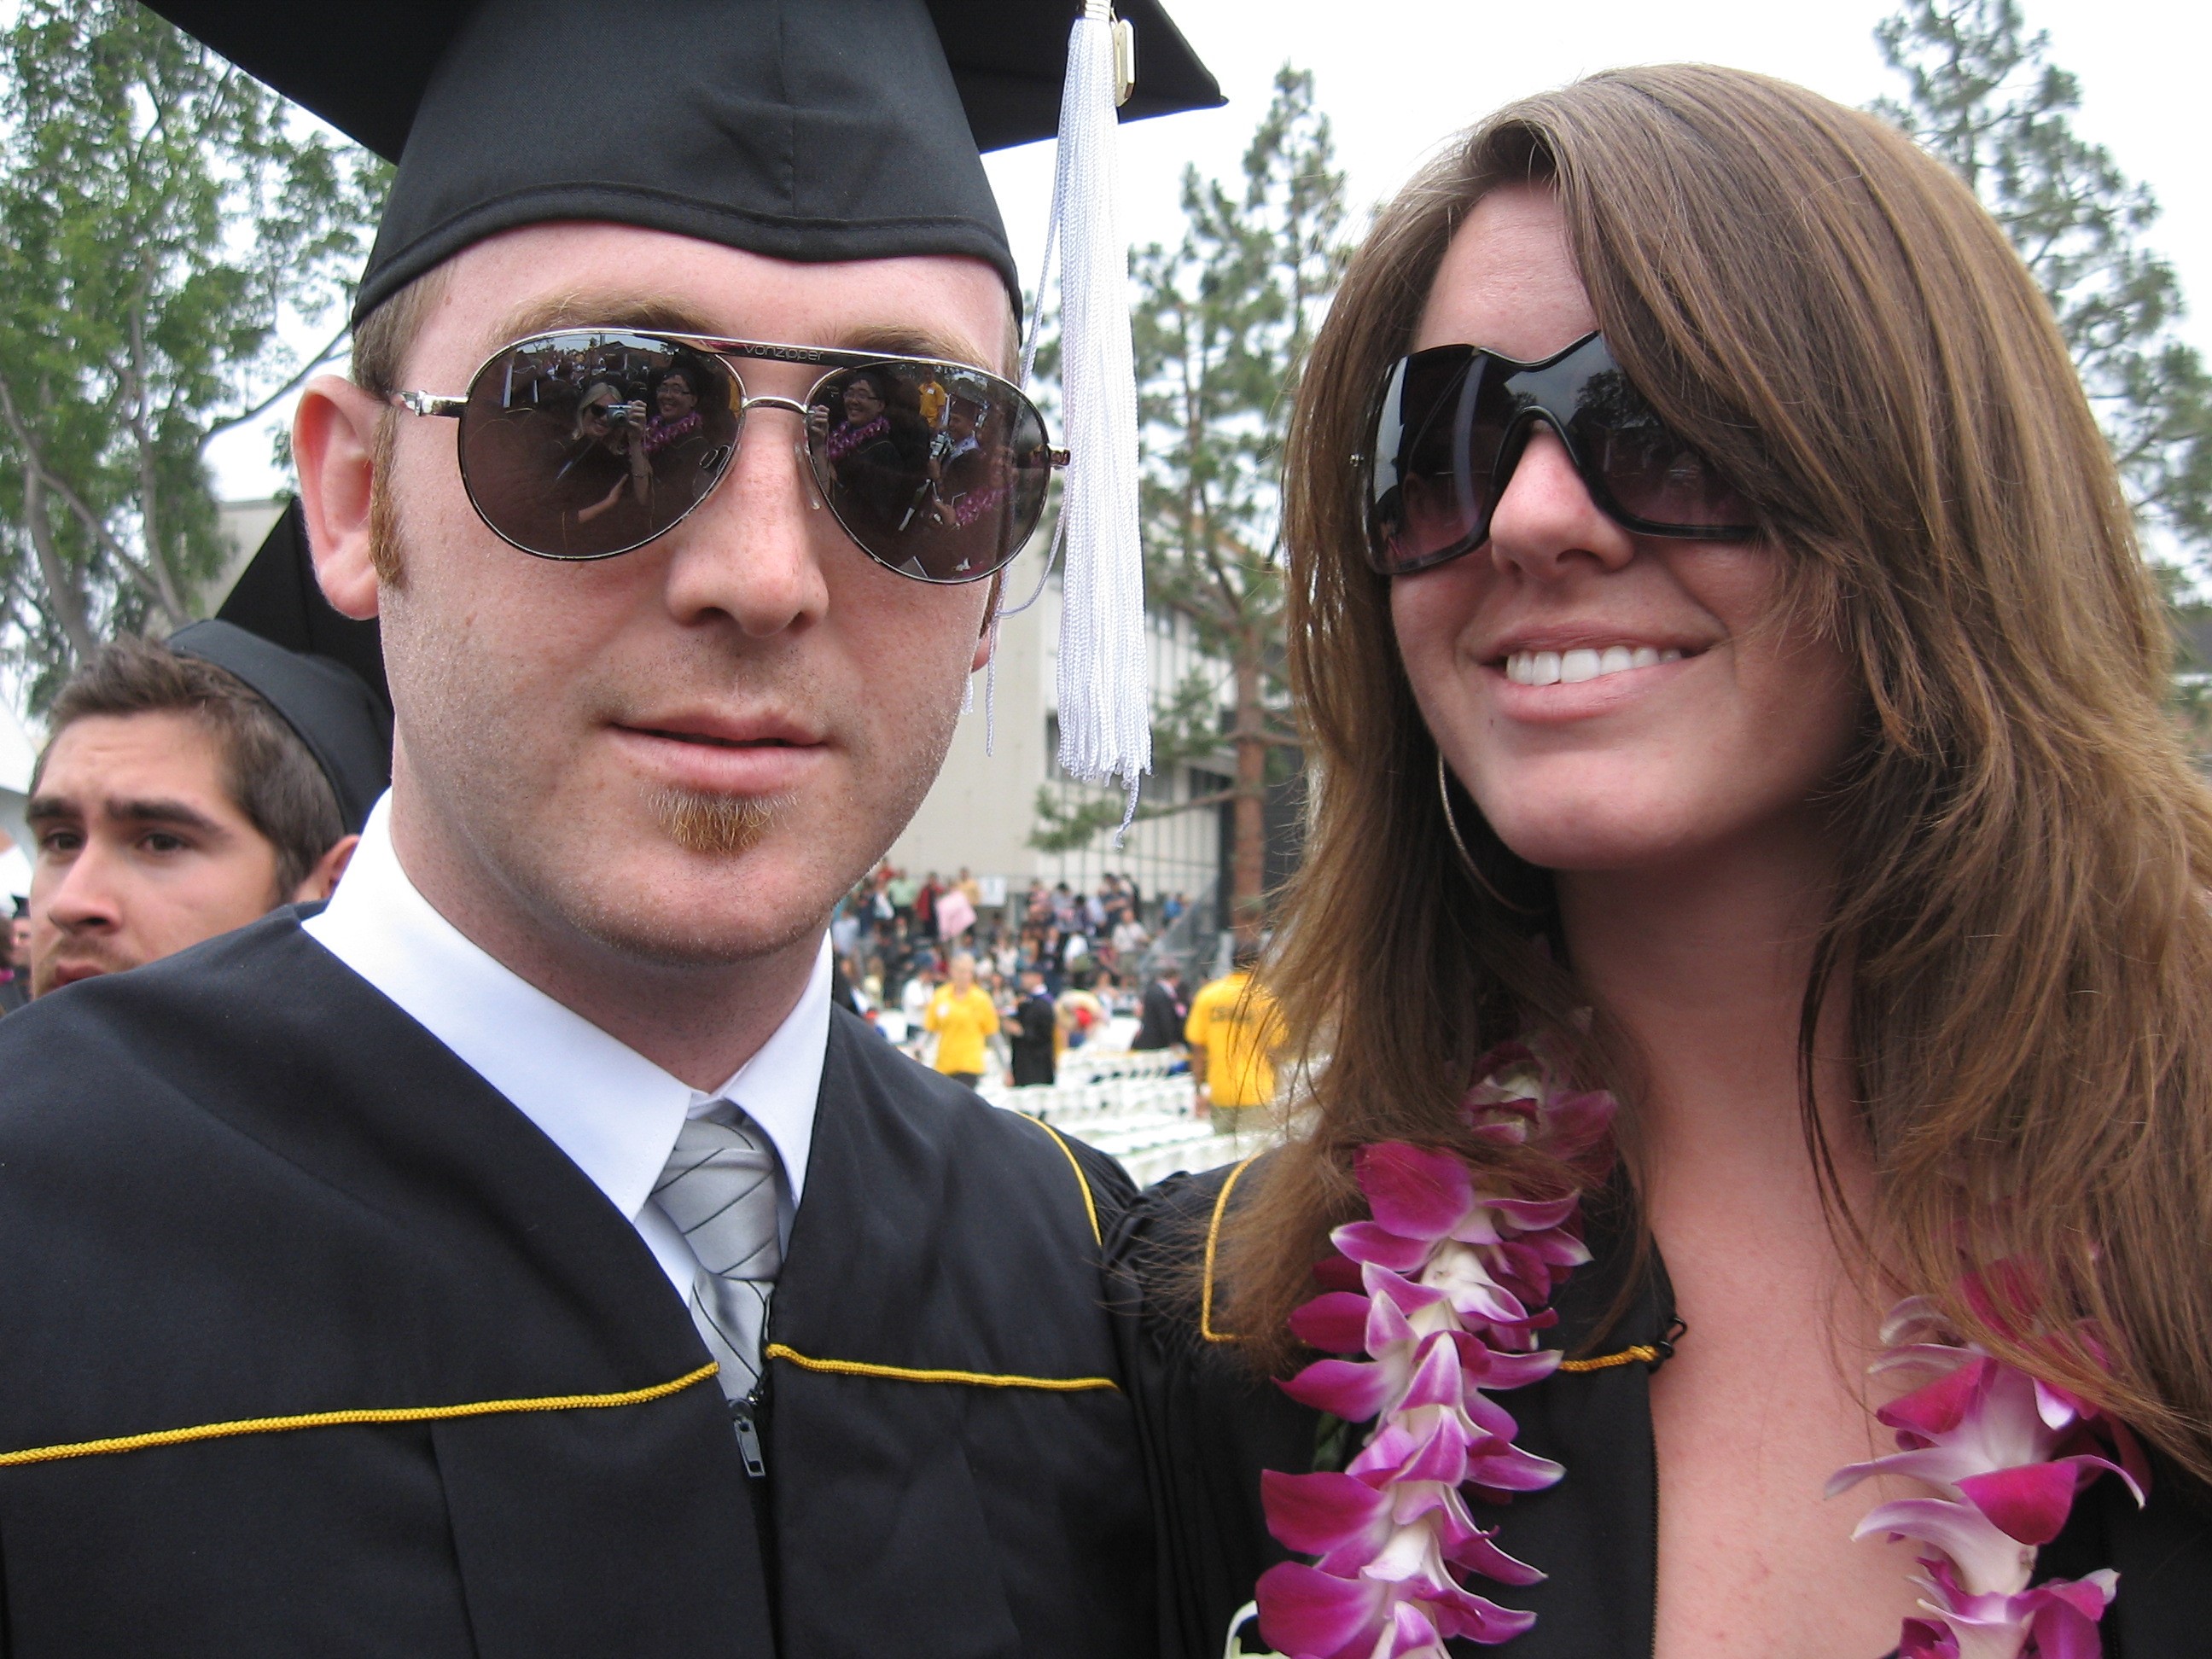 CSULB couple at Commencement